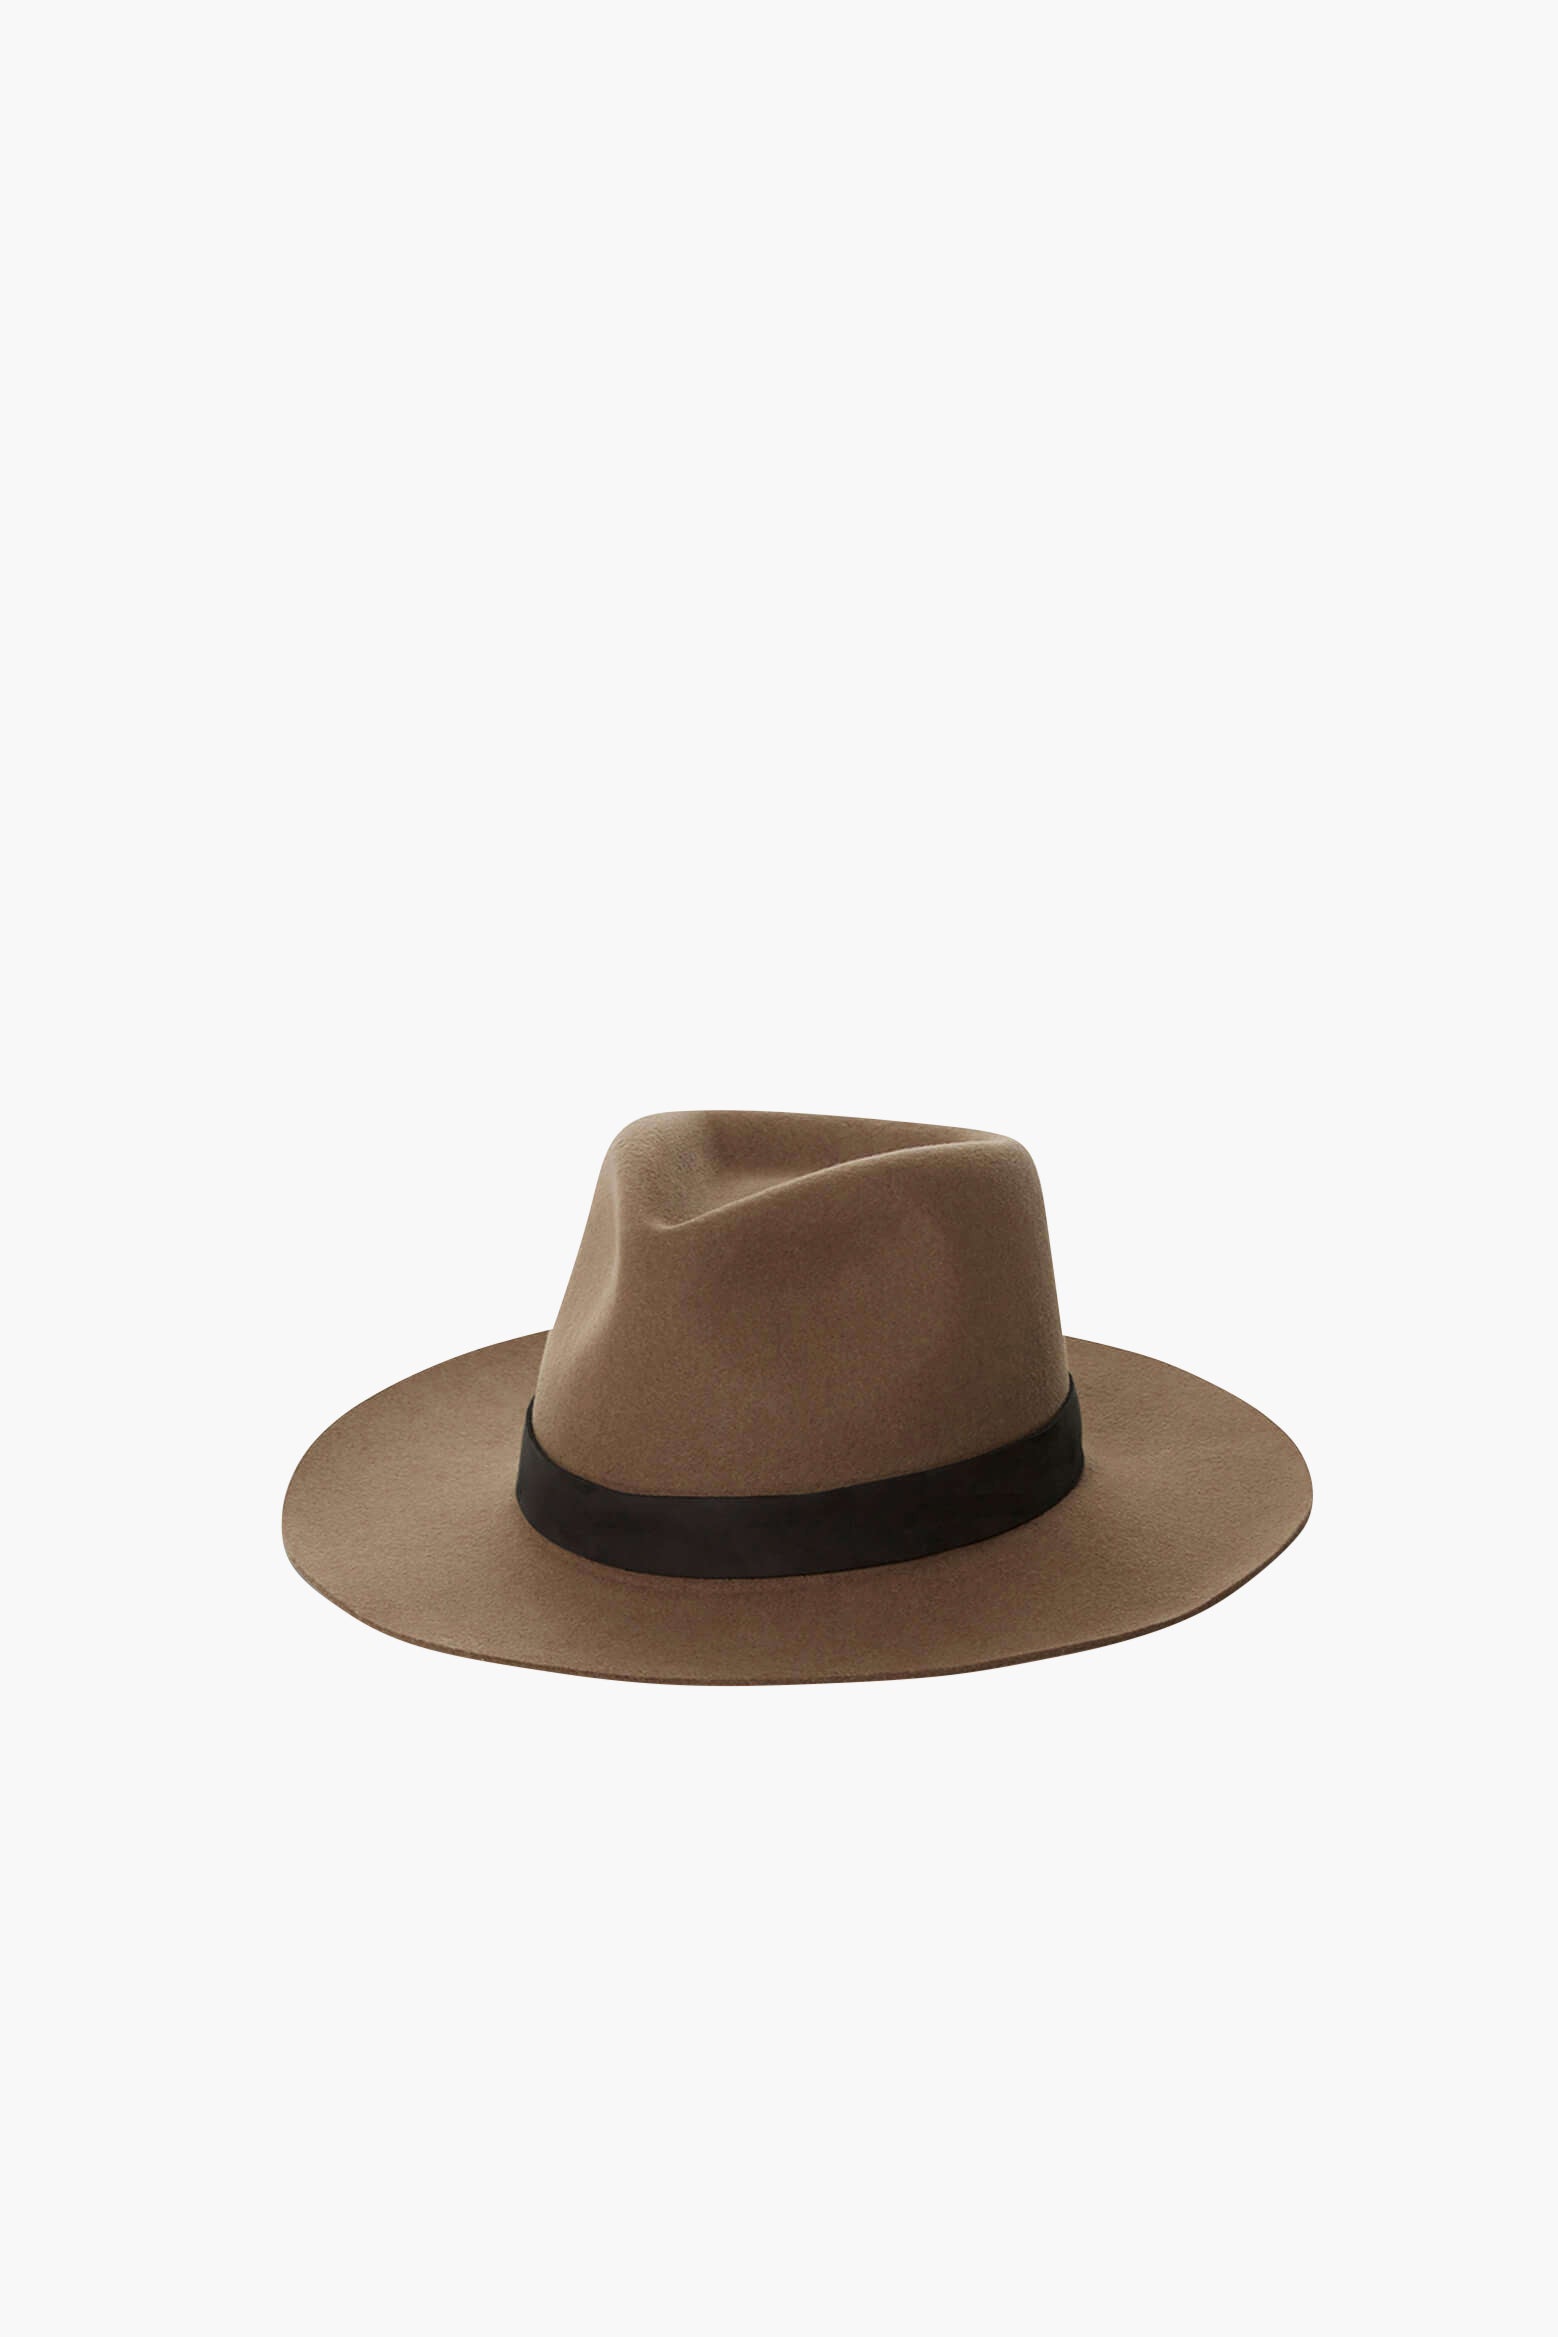 Janessa Leone Luca Fedora in Camel from The New Trend